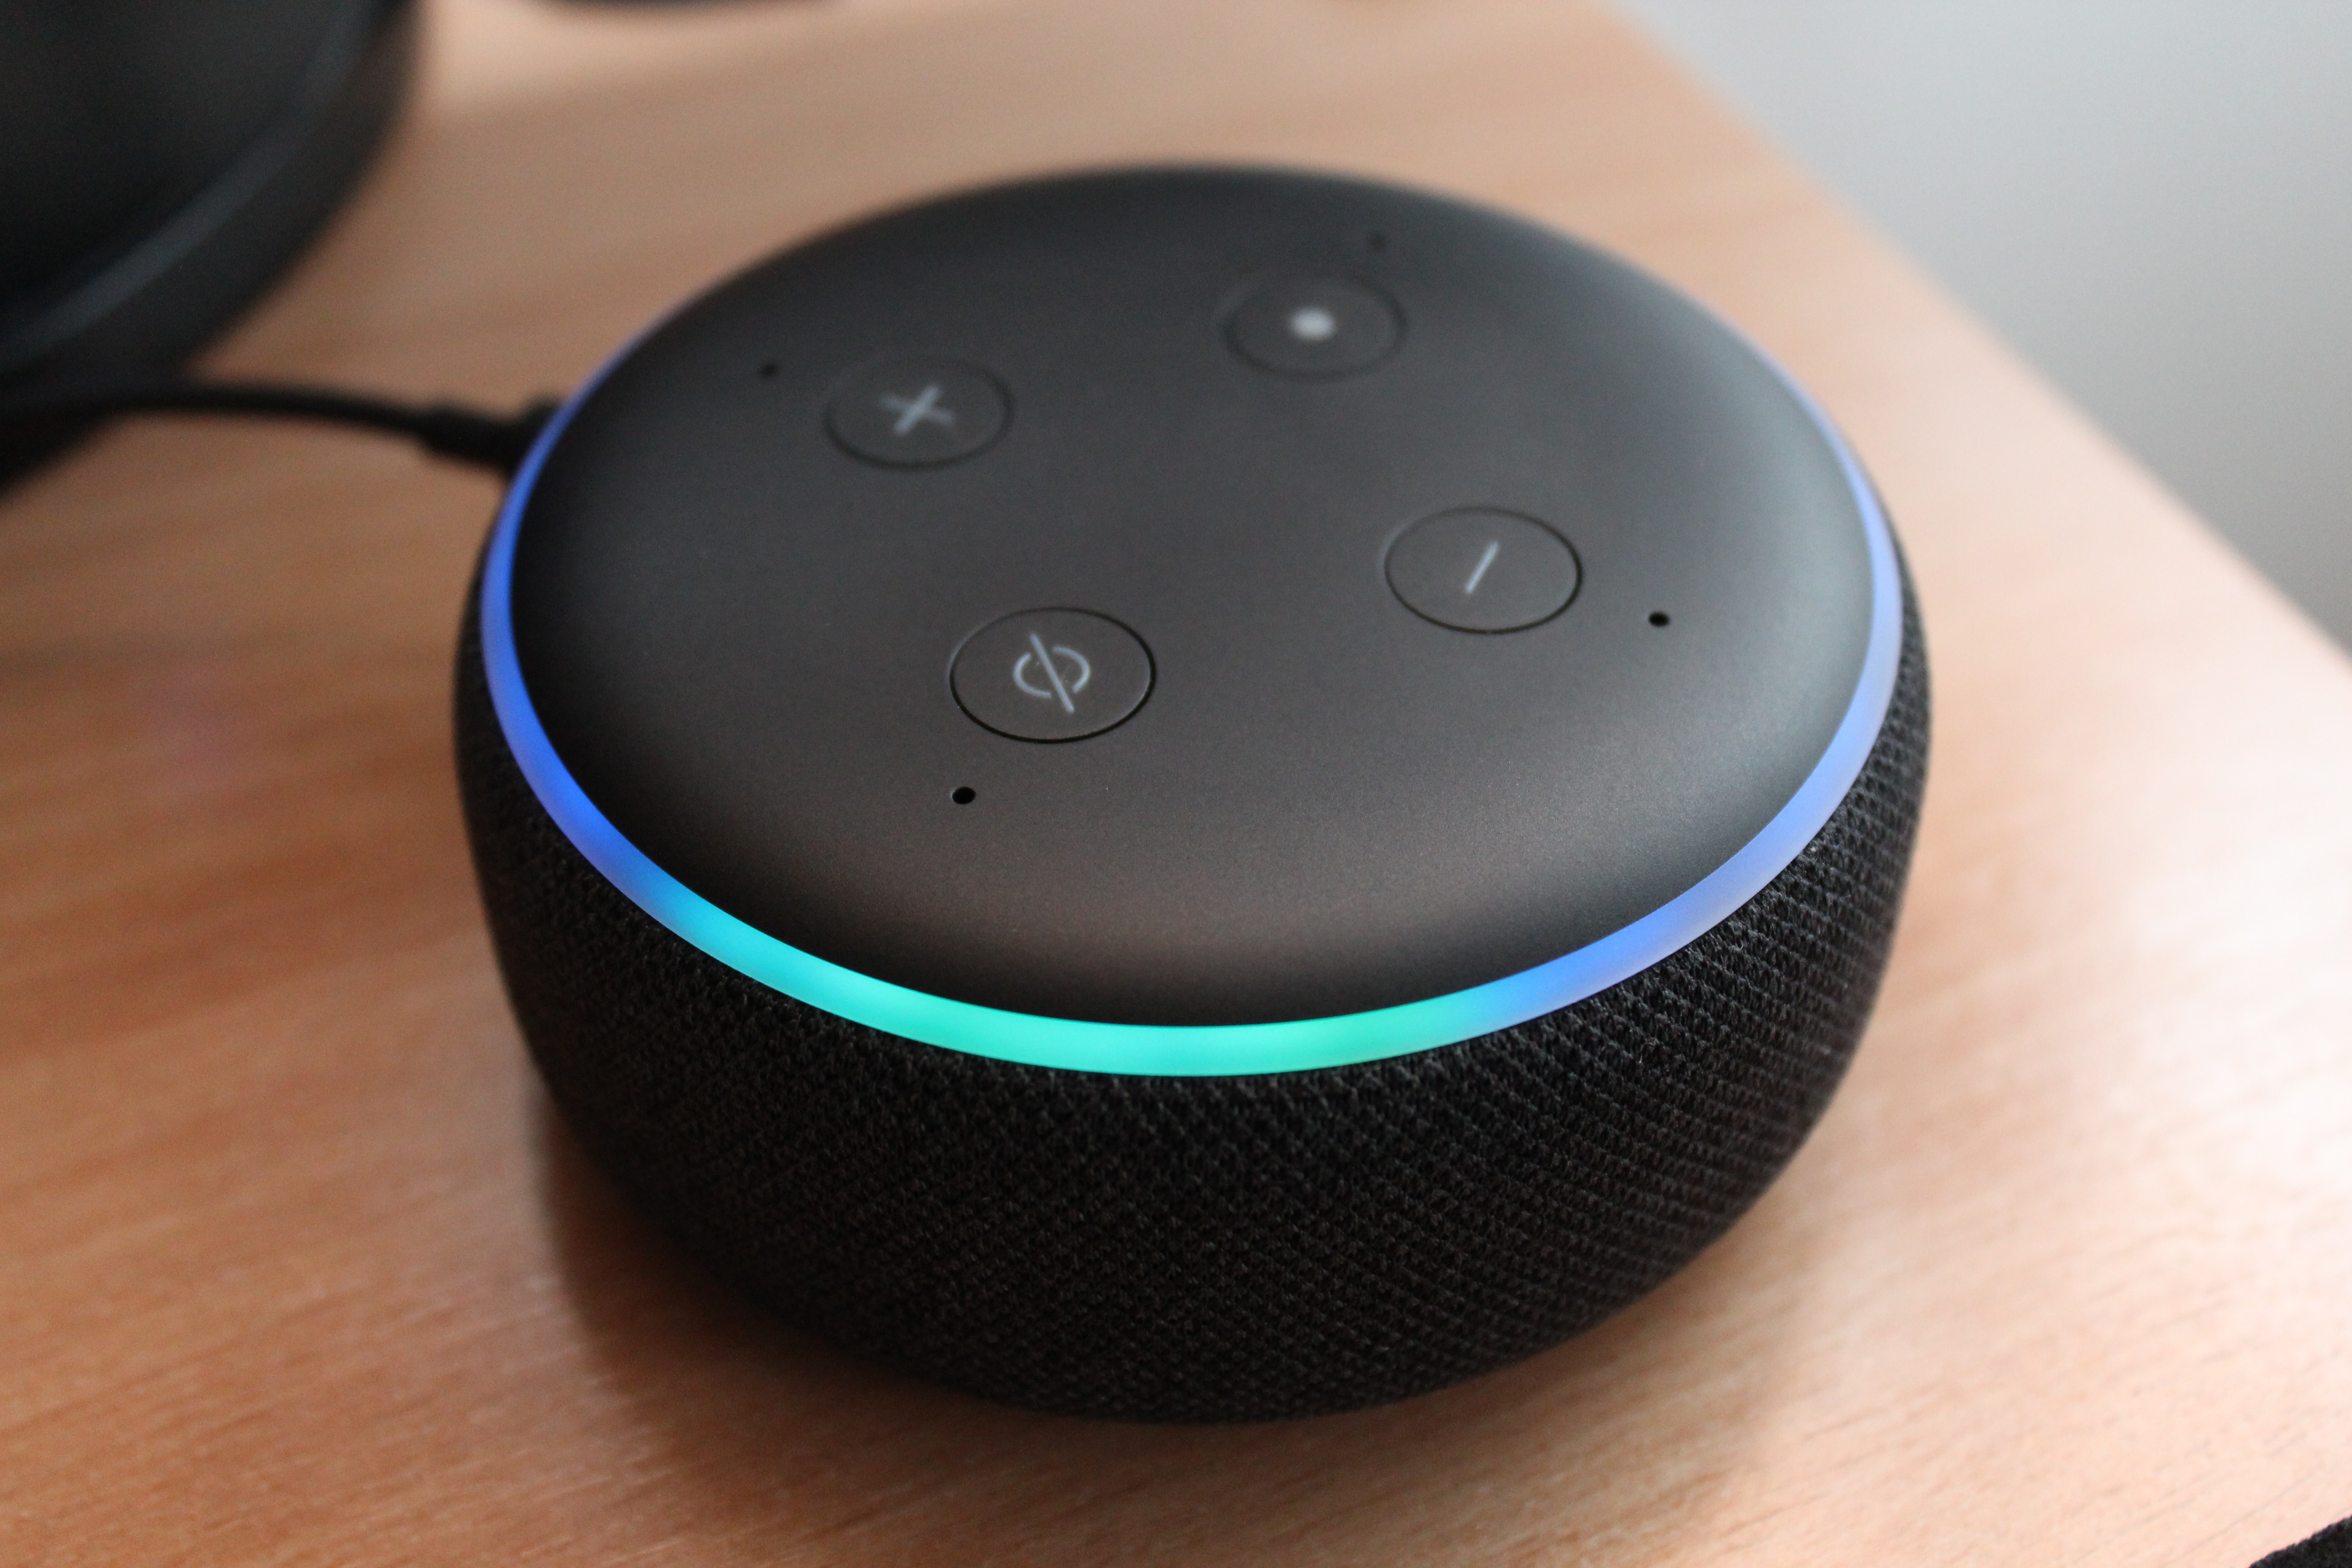 How To Stop Alexa From Listening